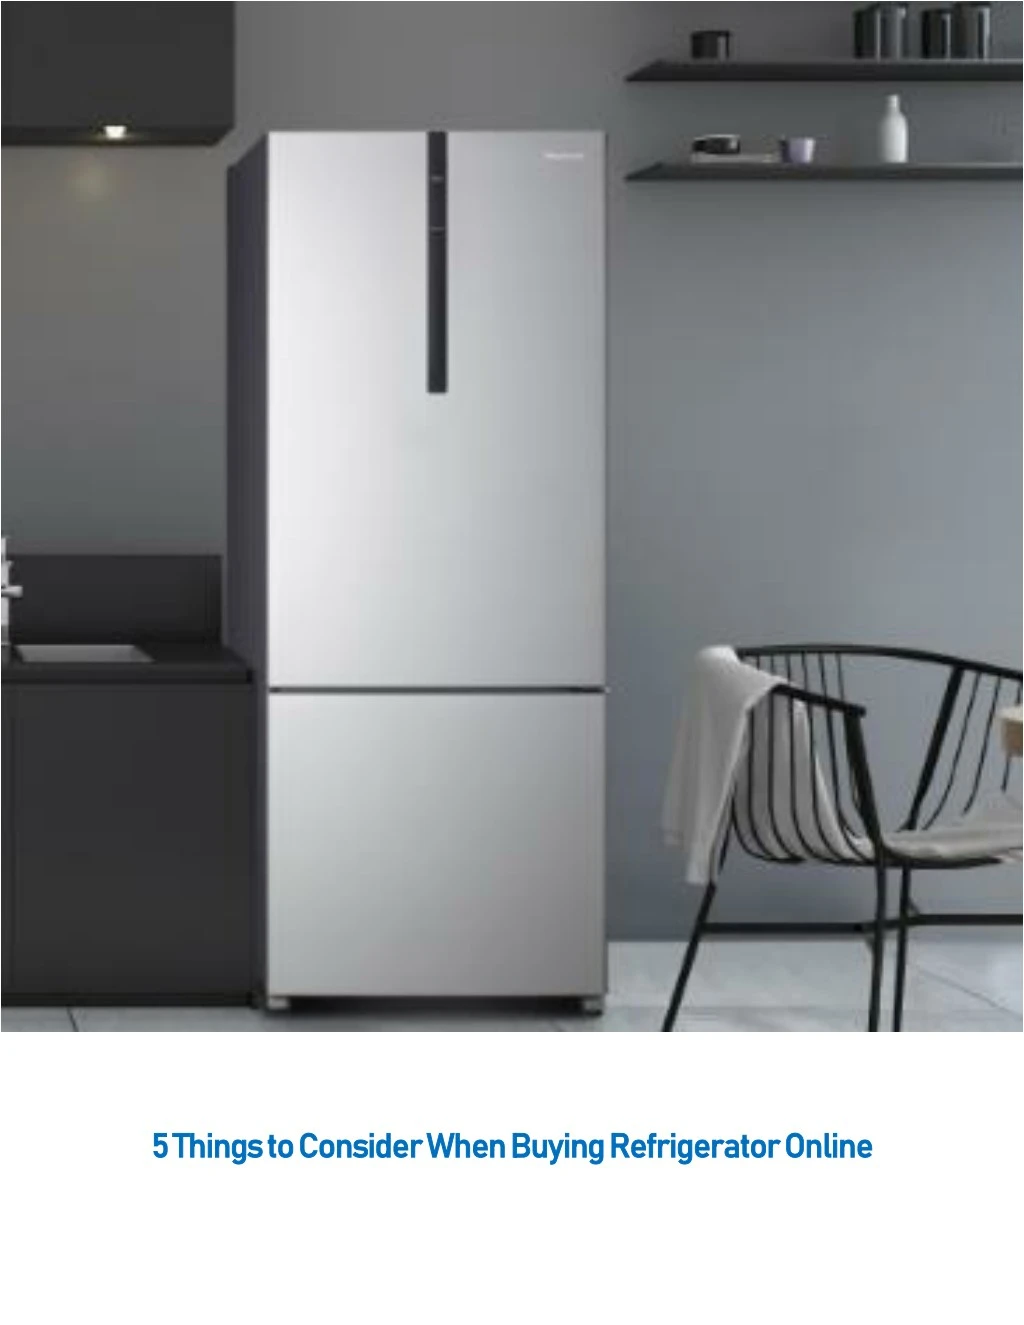 5 things to consider when buying refrigerator